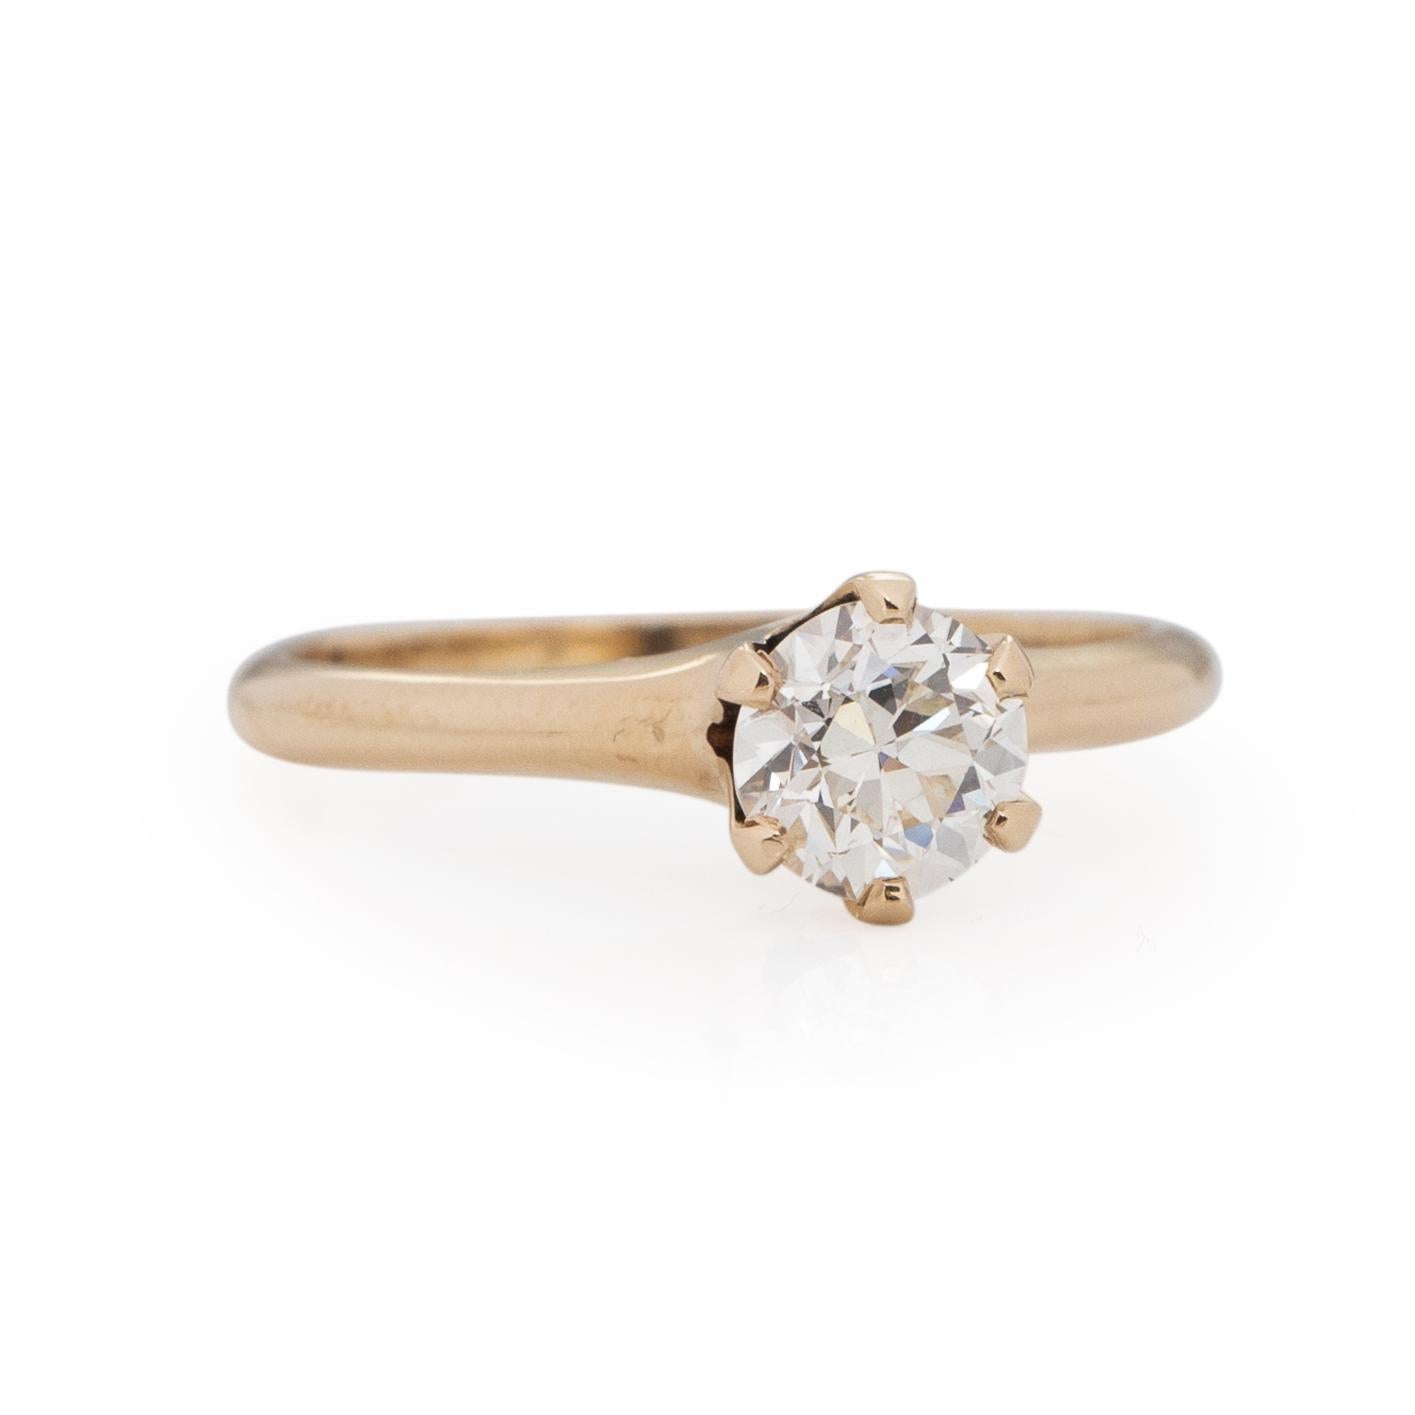 Here we have a excellent example of the Otsby & Barton Engagement Ring. Crafted in 14K yellow gold, this classic solitaire had six prongs that hold a beautifully cut old European cut 0.75Ct VS diamond. The diamond is the perfect centerpiece to this